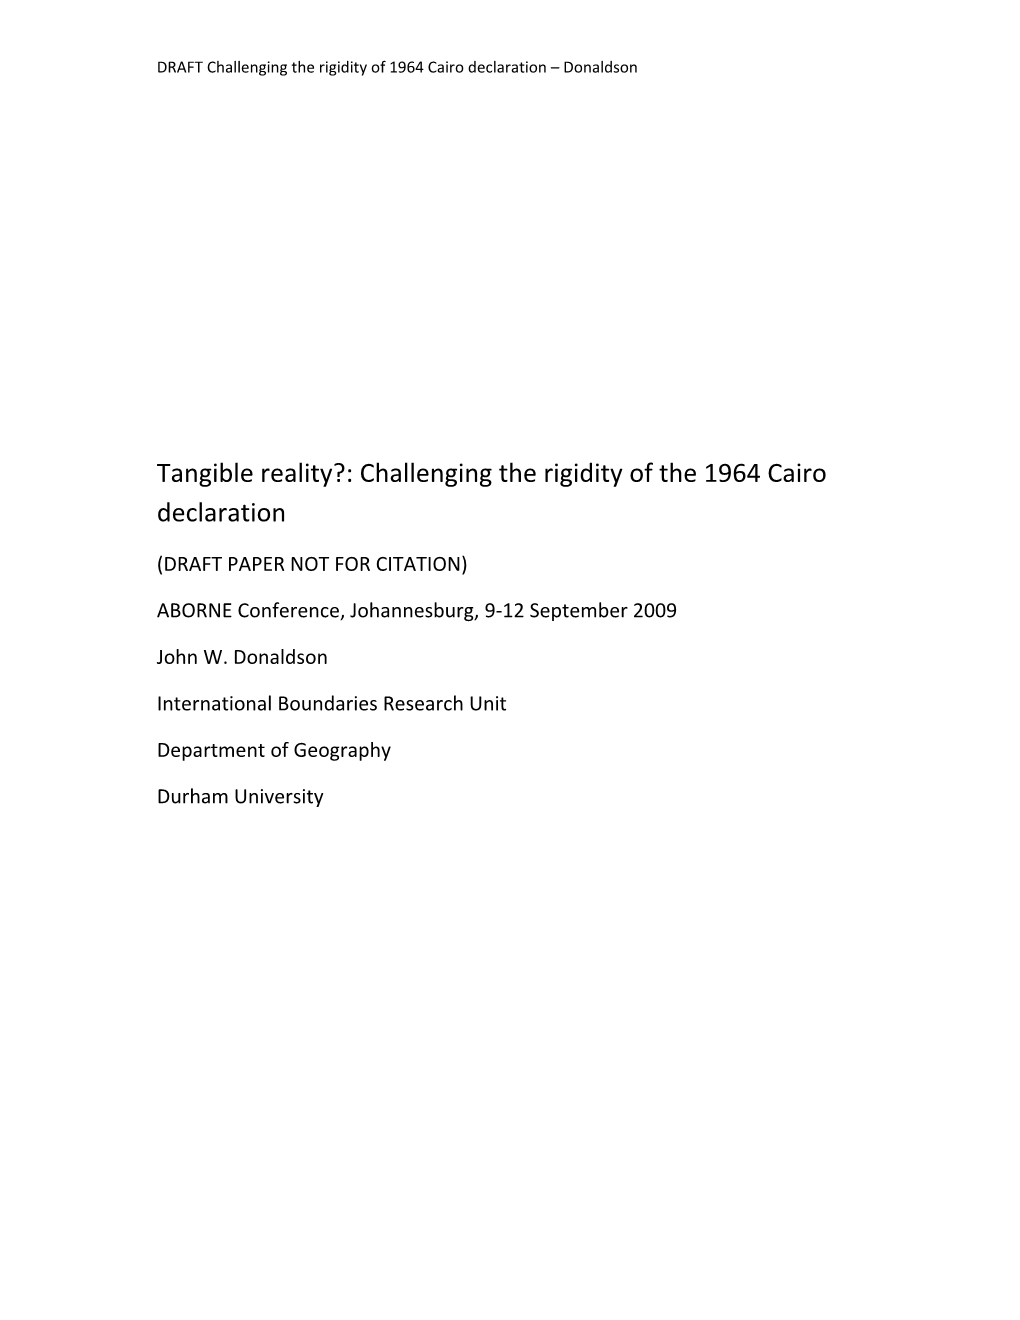 Tangible Reality?: Challenging the Rigidity of the 1964 Cairo Declaration